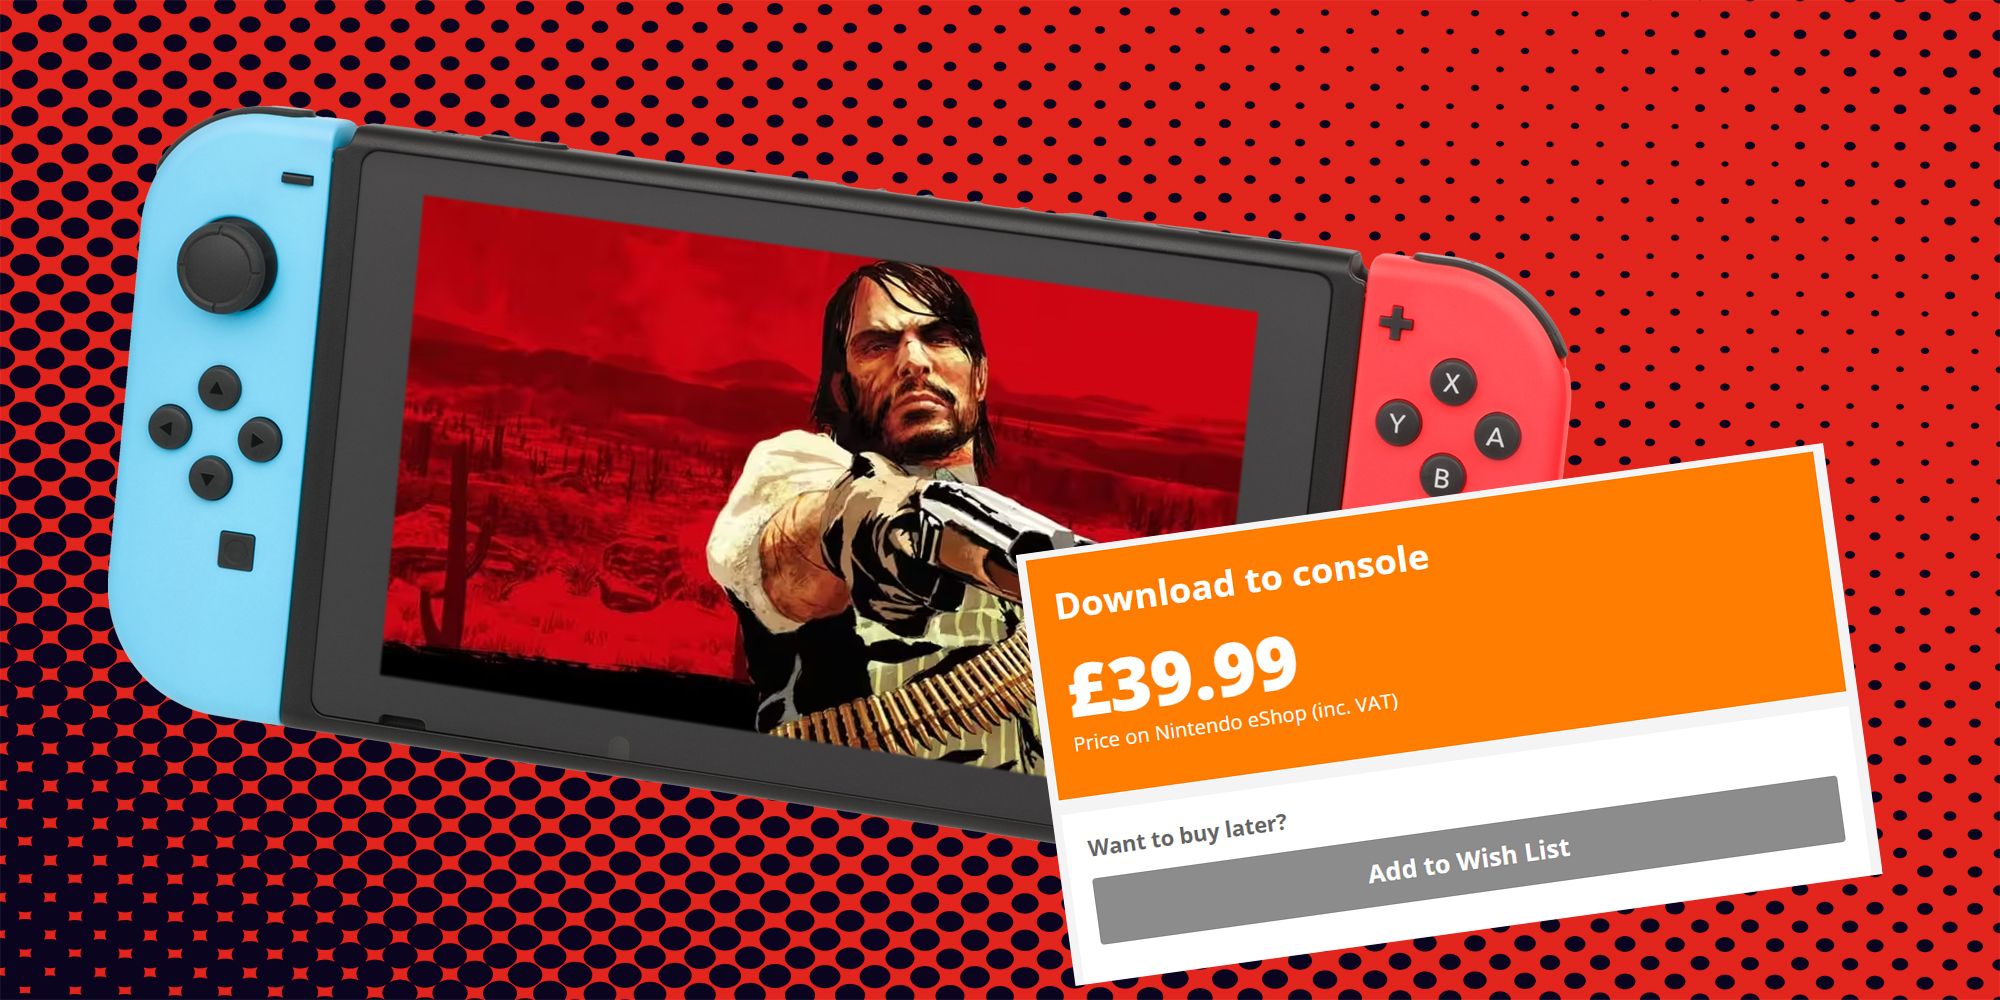 Red Dead Redemption Nintendo Switch and PS4 release time, date and price, Gaming, Entertainment